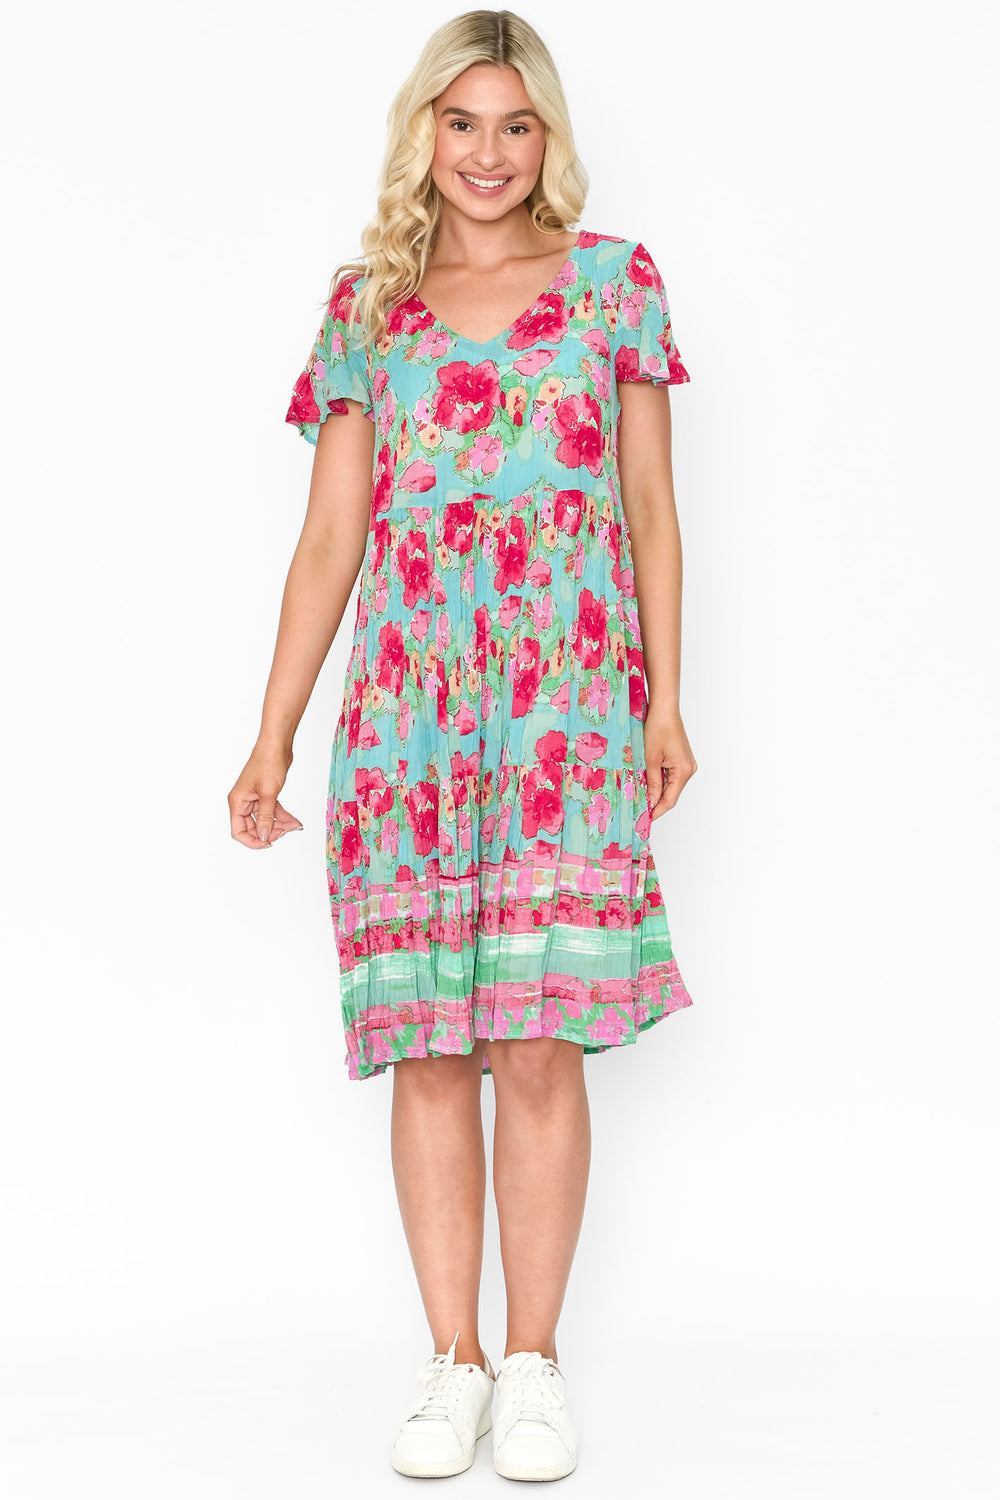 One Summer DW71F Kimberley Turquoise Floral Print Smock Dress - Experience Boutique